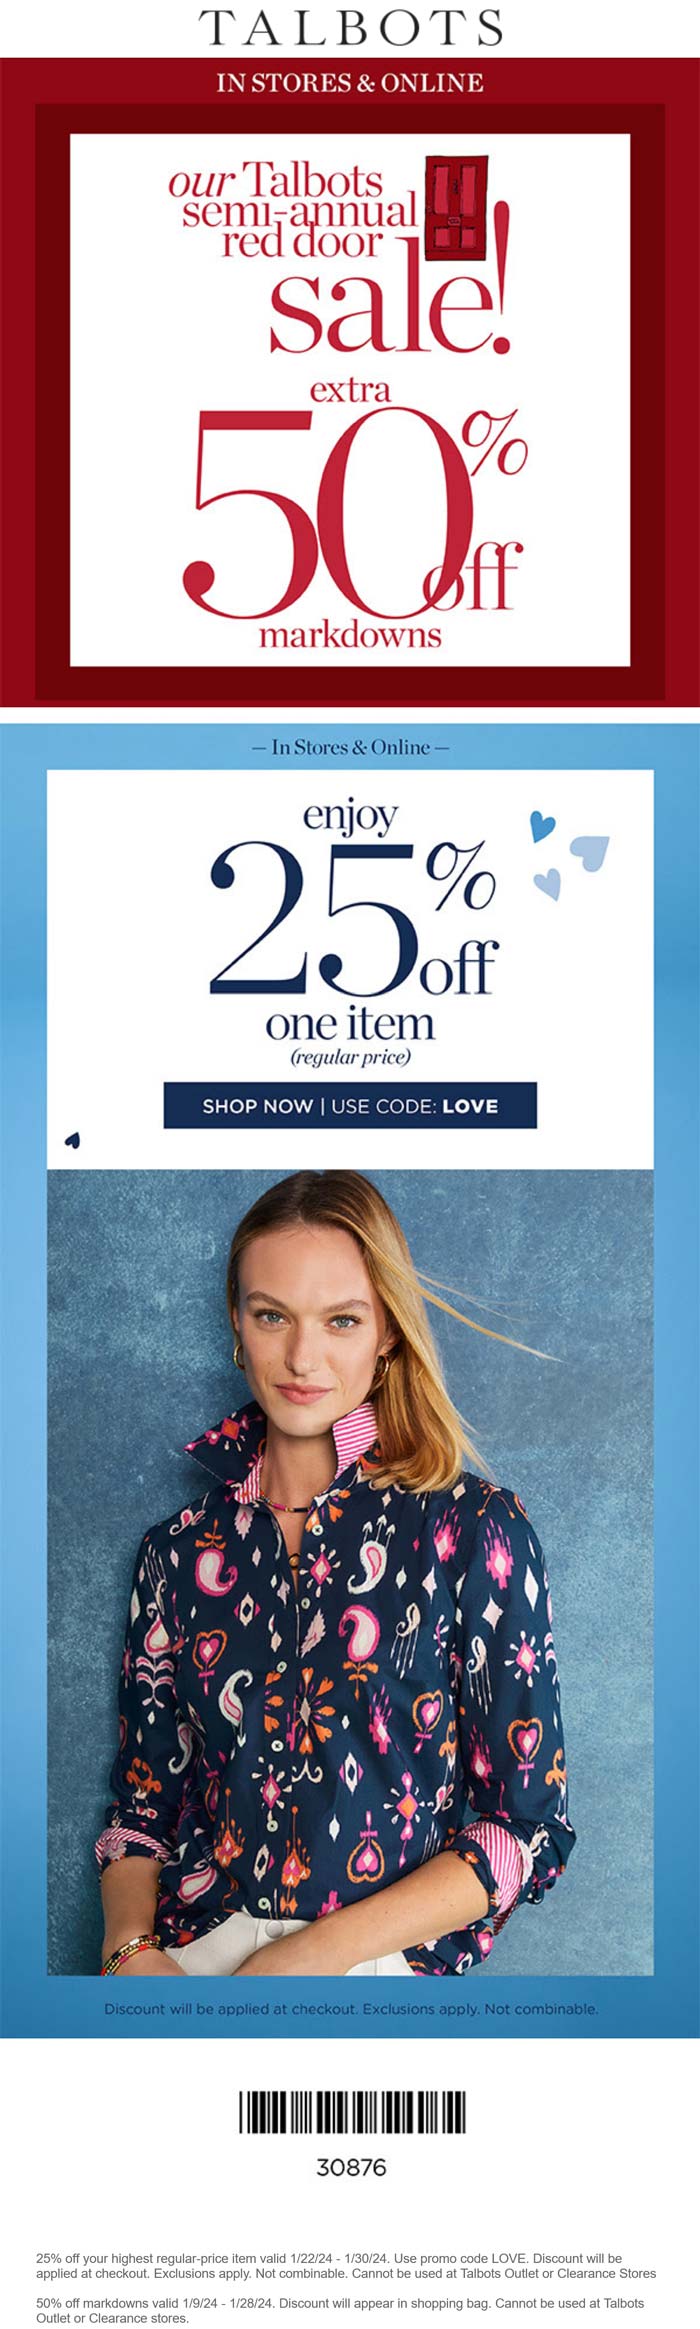 Talbots stores Coupon  25% off a single regular item & 50% off sale items at Talbots, or online via promo code LOVE #talbots 